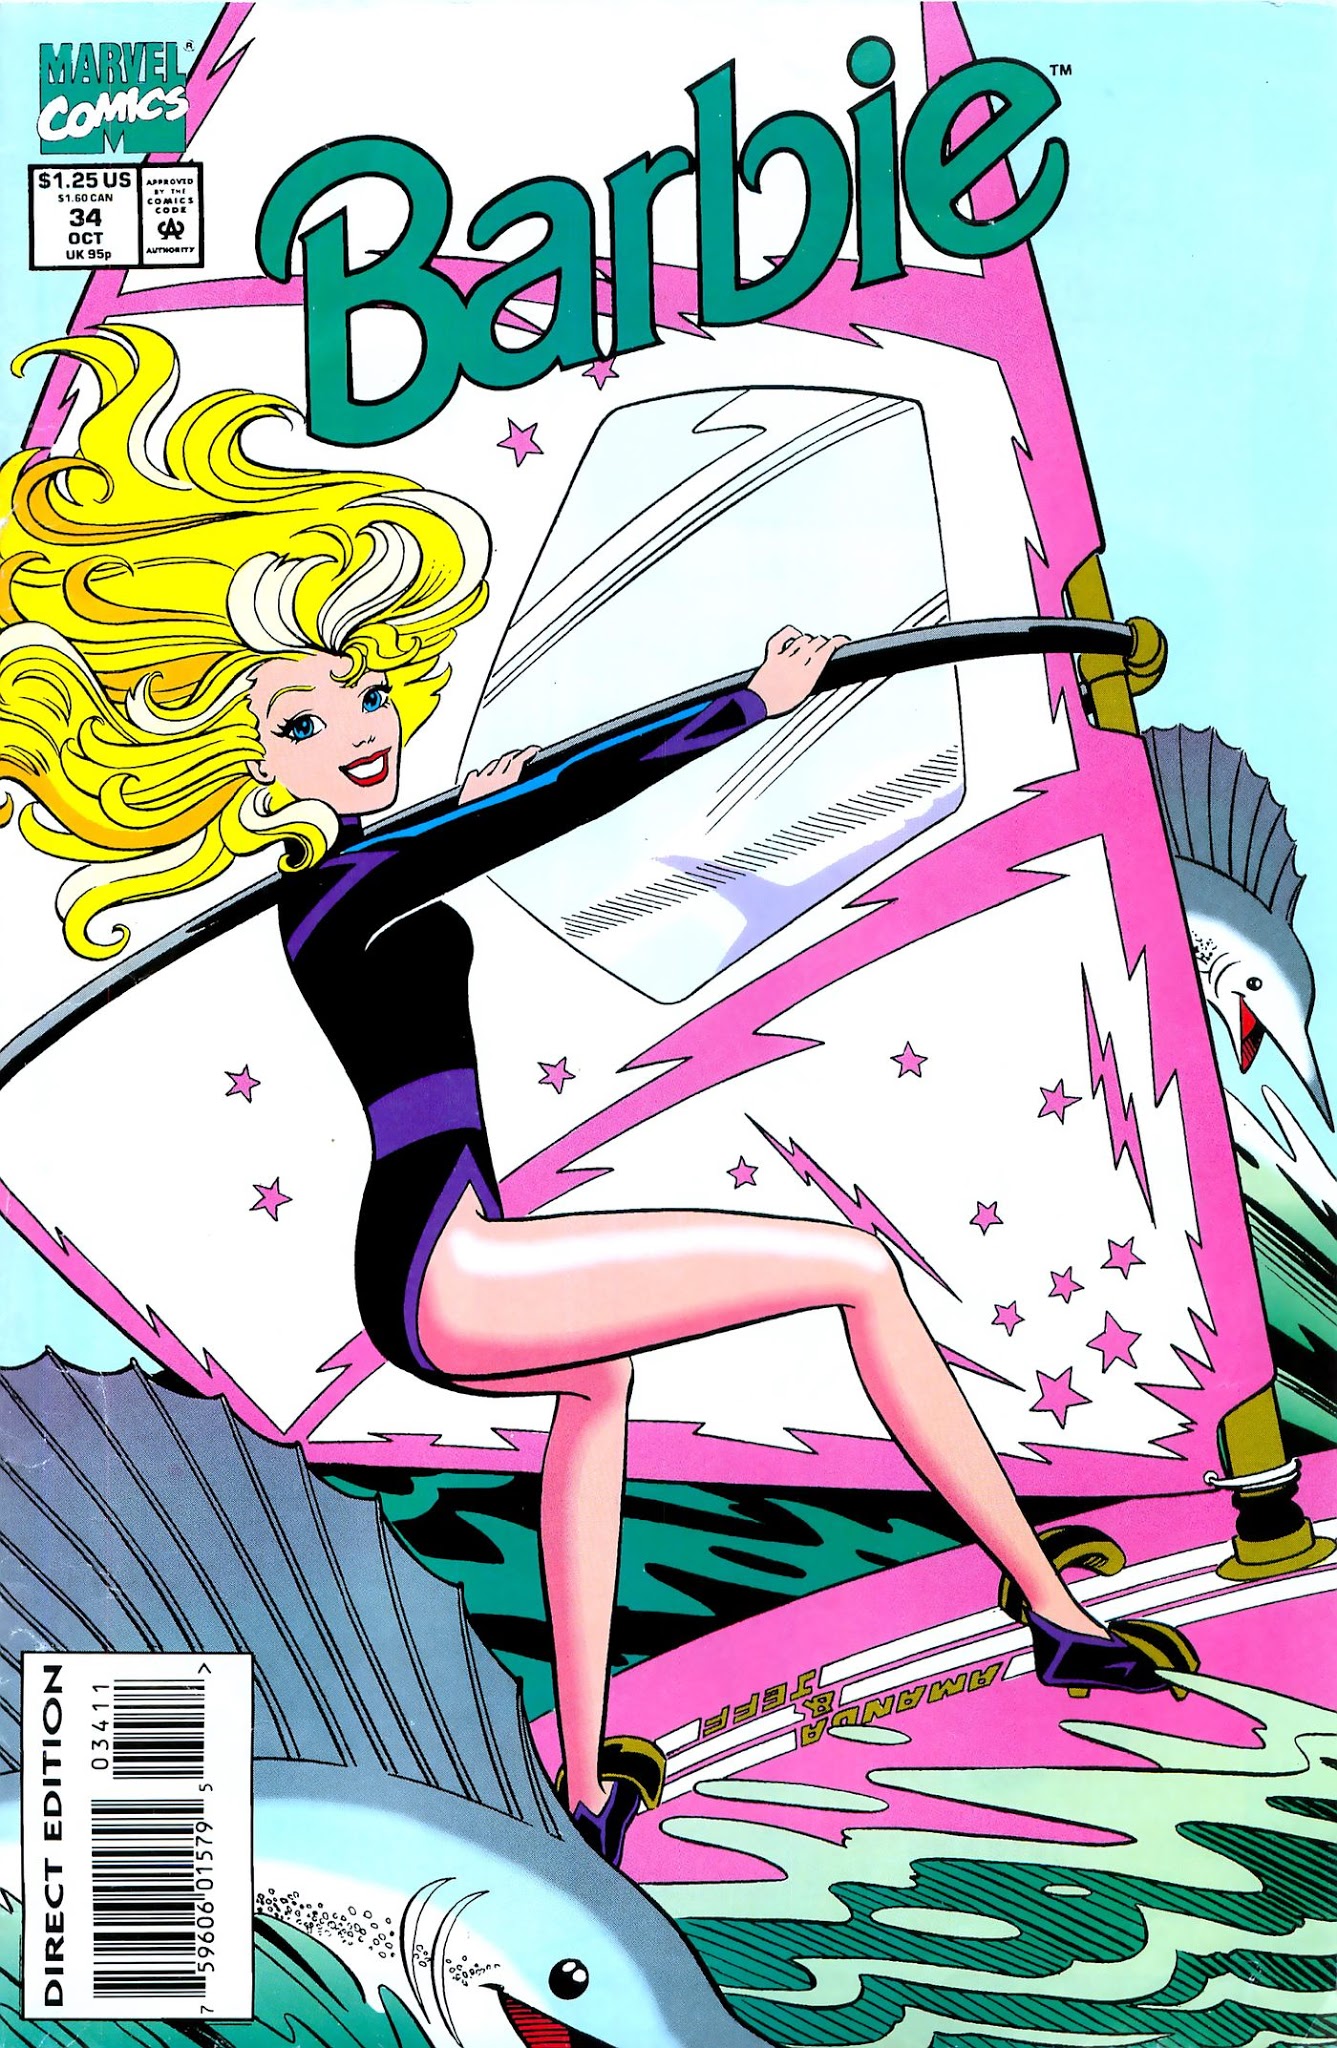 Read online Barbie comic -  Issue #34 - 1